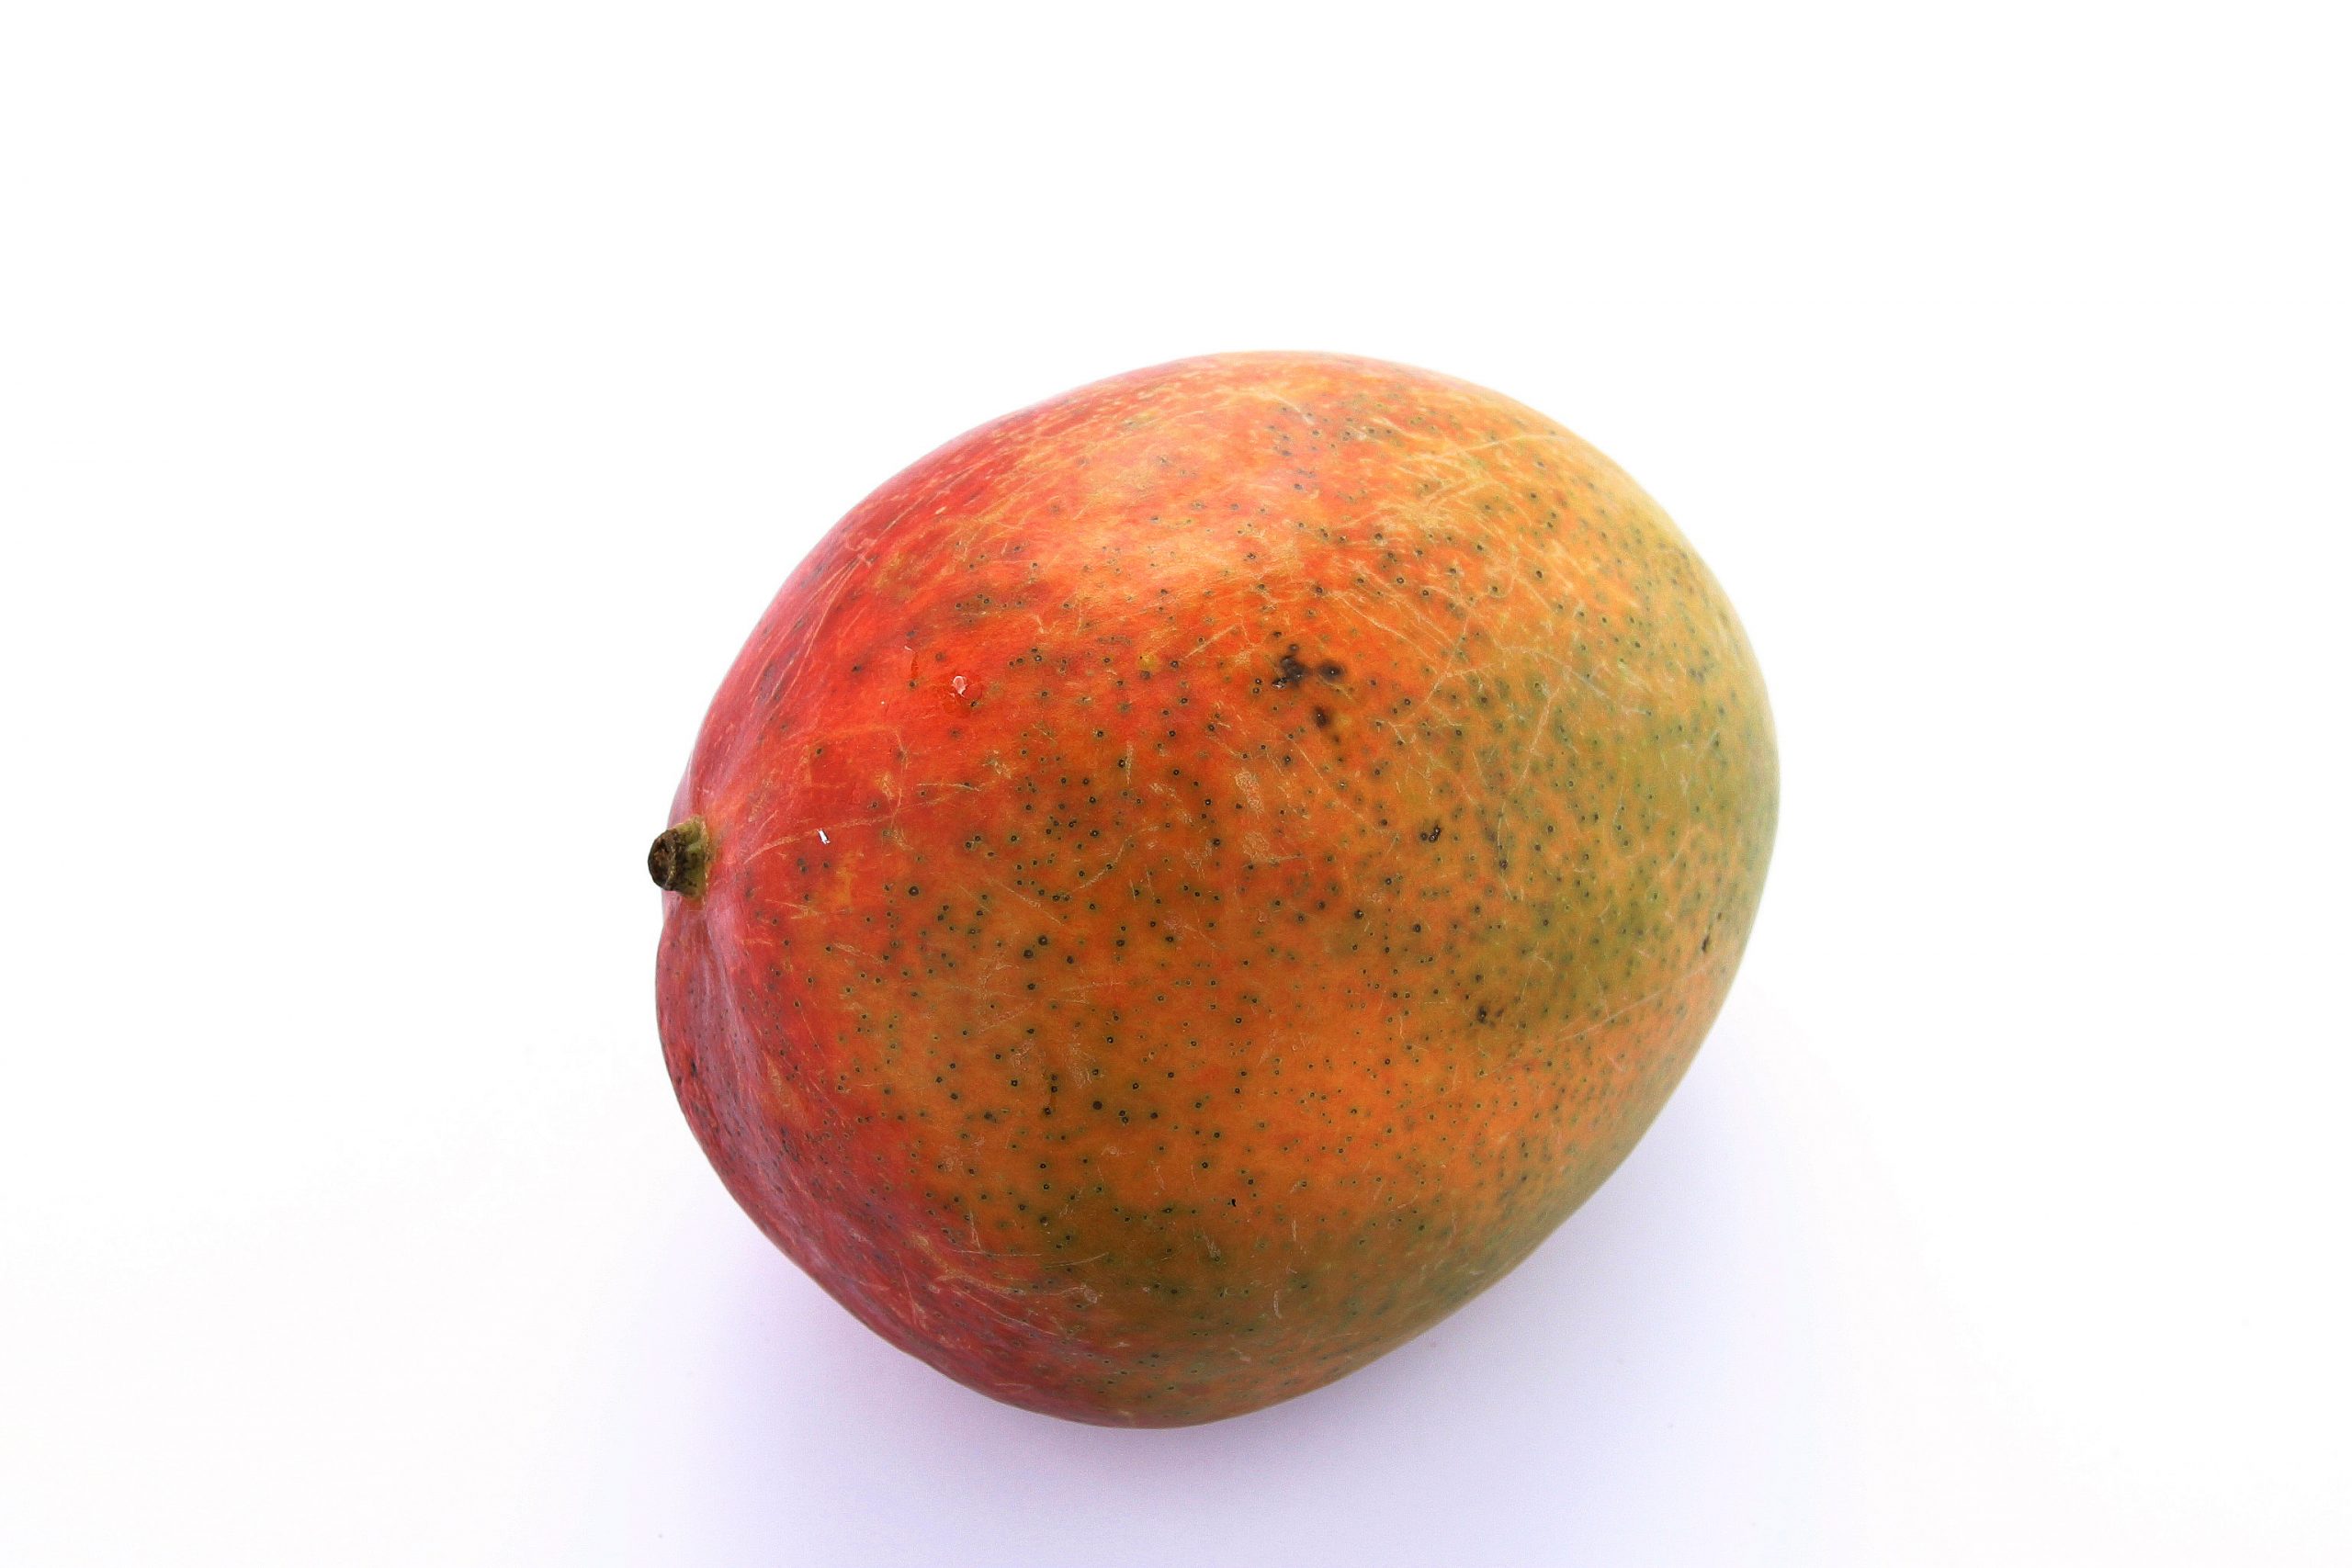 Mango is the world’s fourth most widely traded fruit and Ecuador is one of the main exporters worldwide.